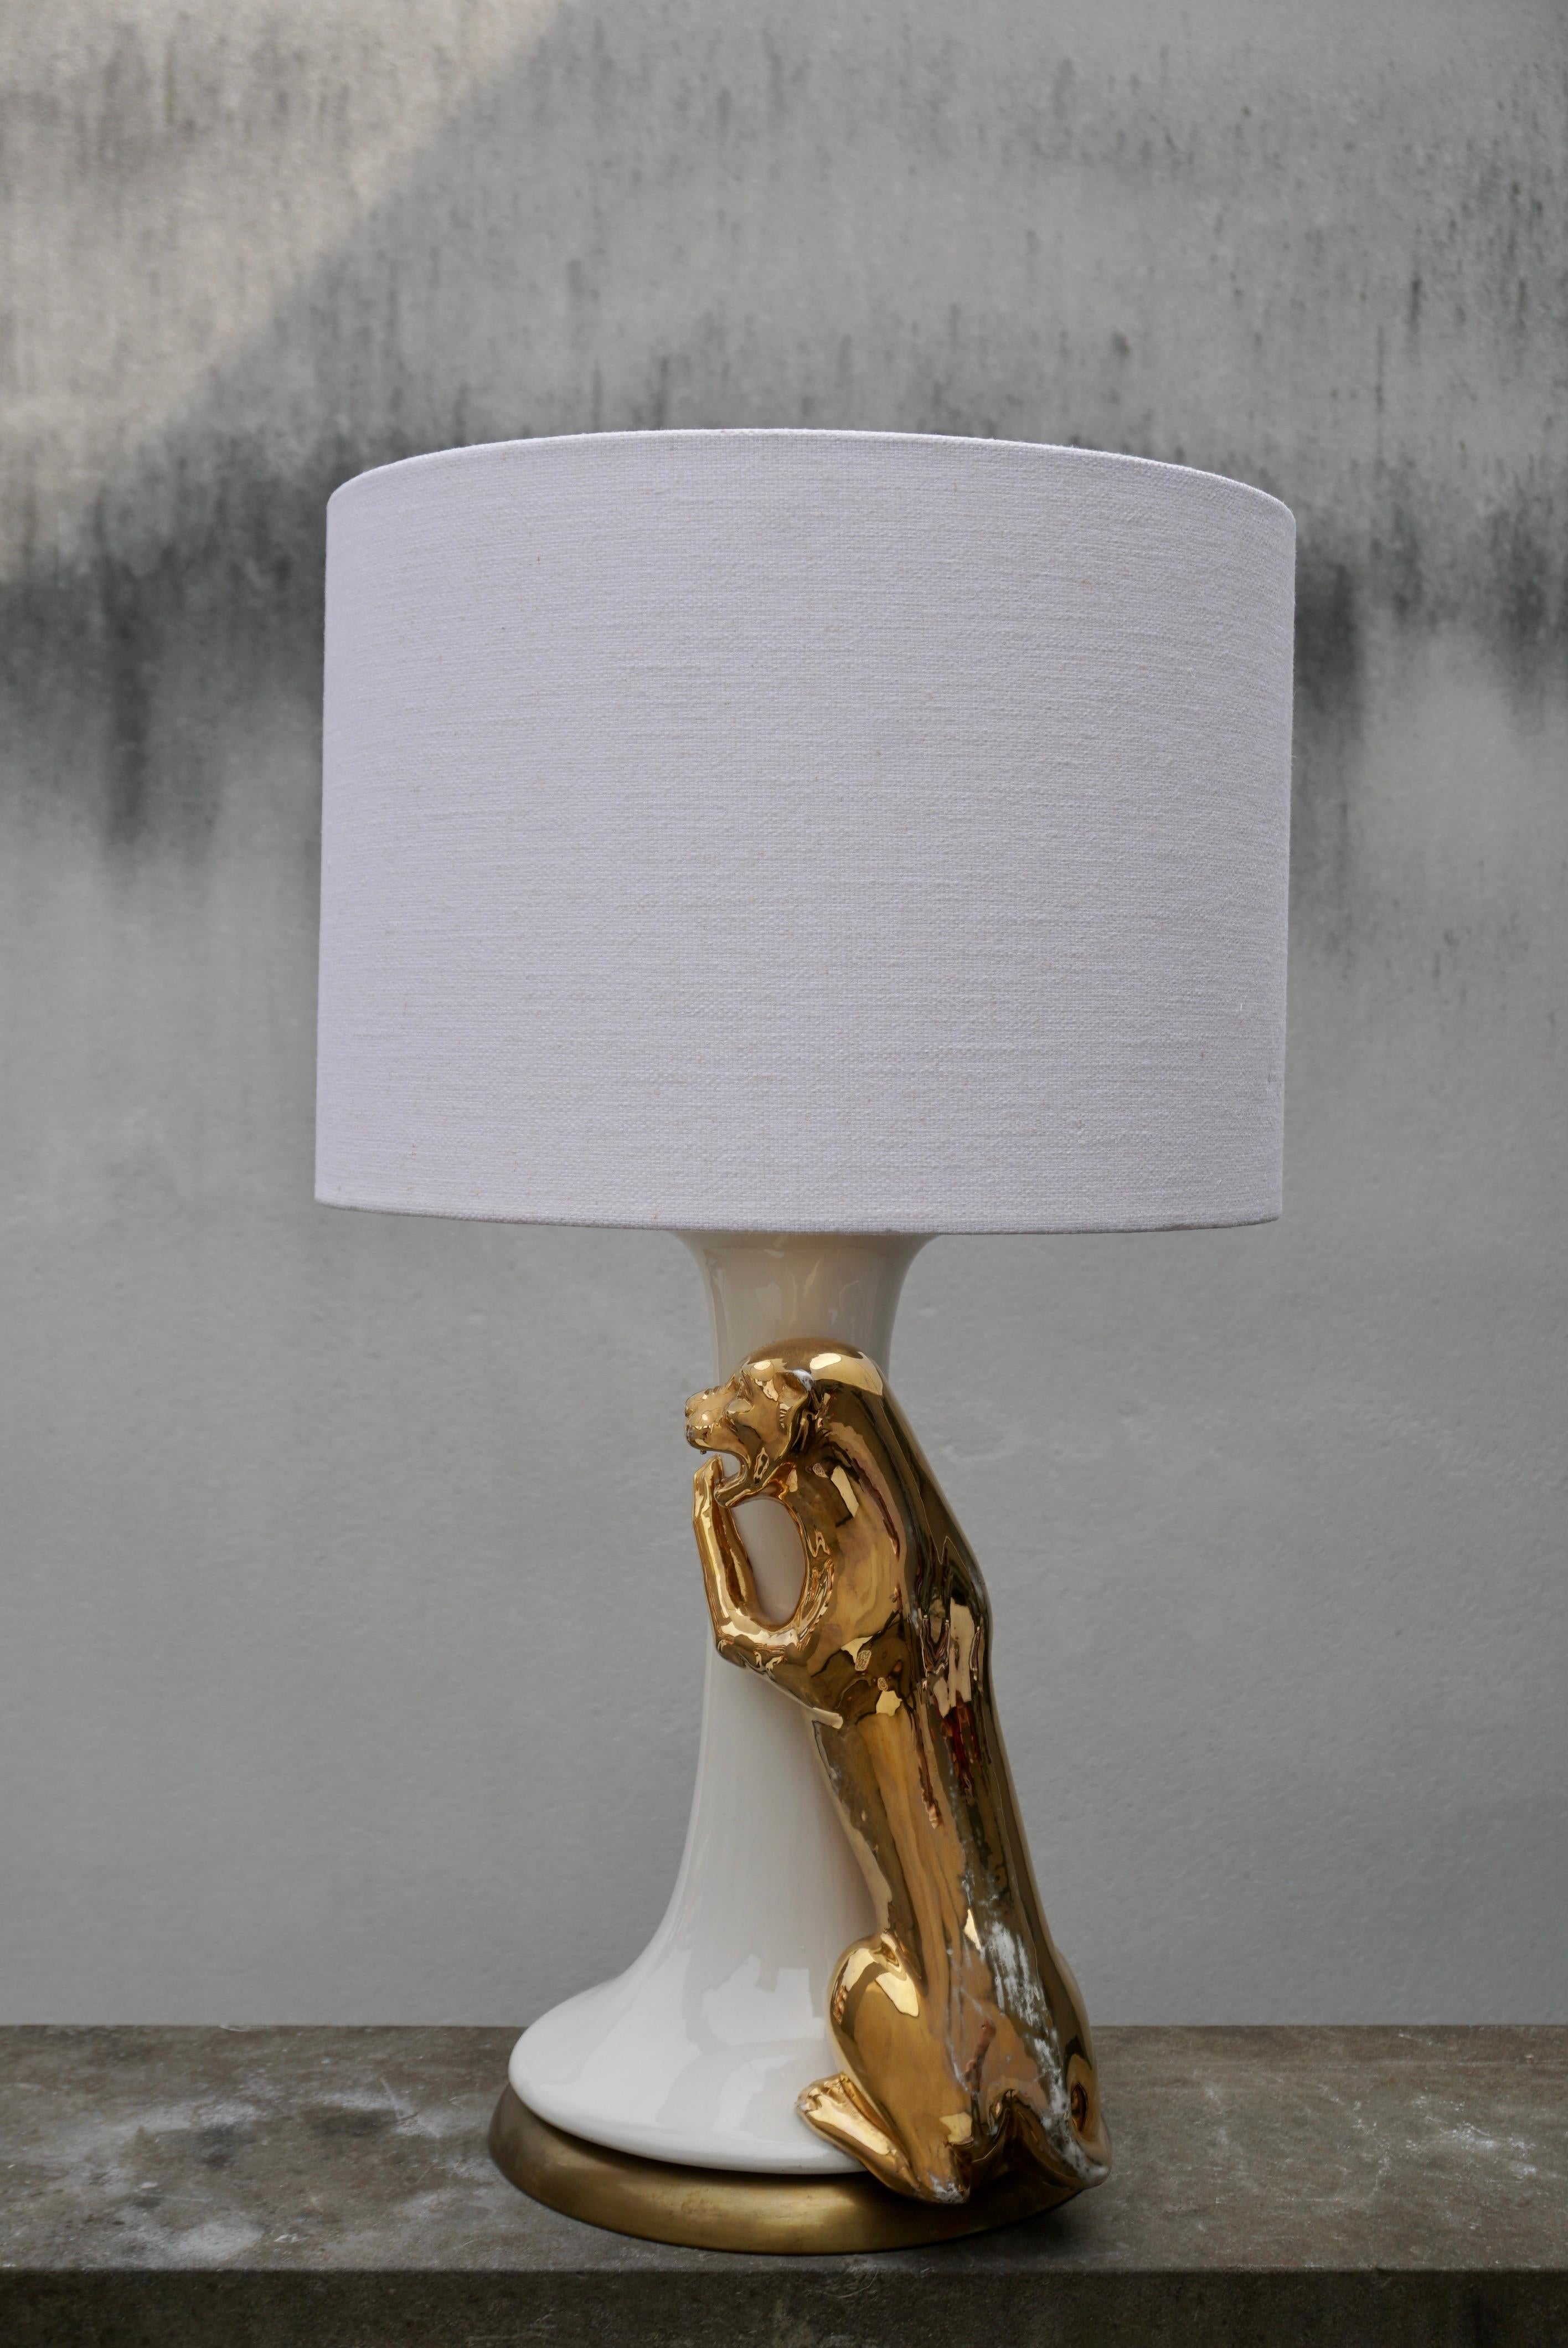 20th Century Italian Midcentury Table Lamp with Ceramic Gilt Panther, 1970s For Sale